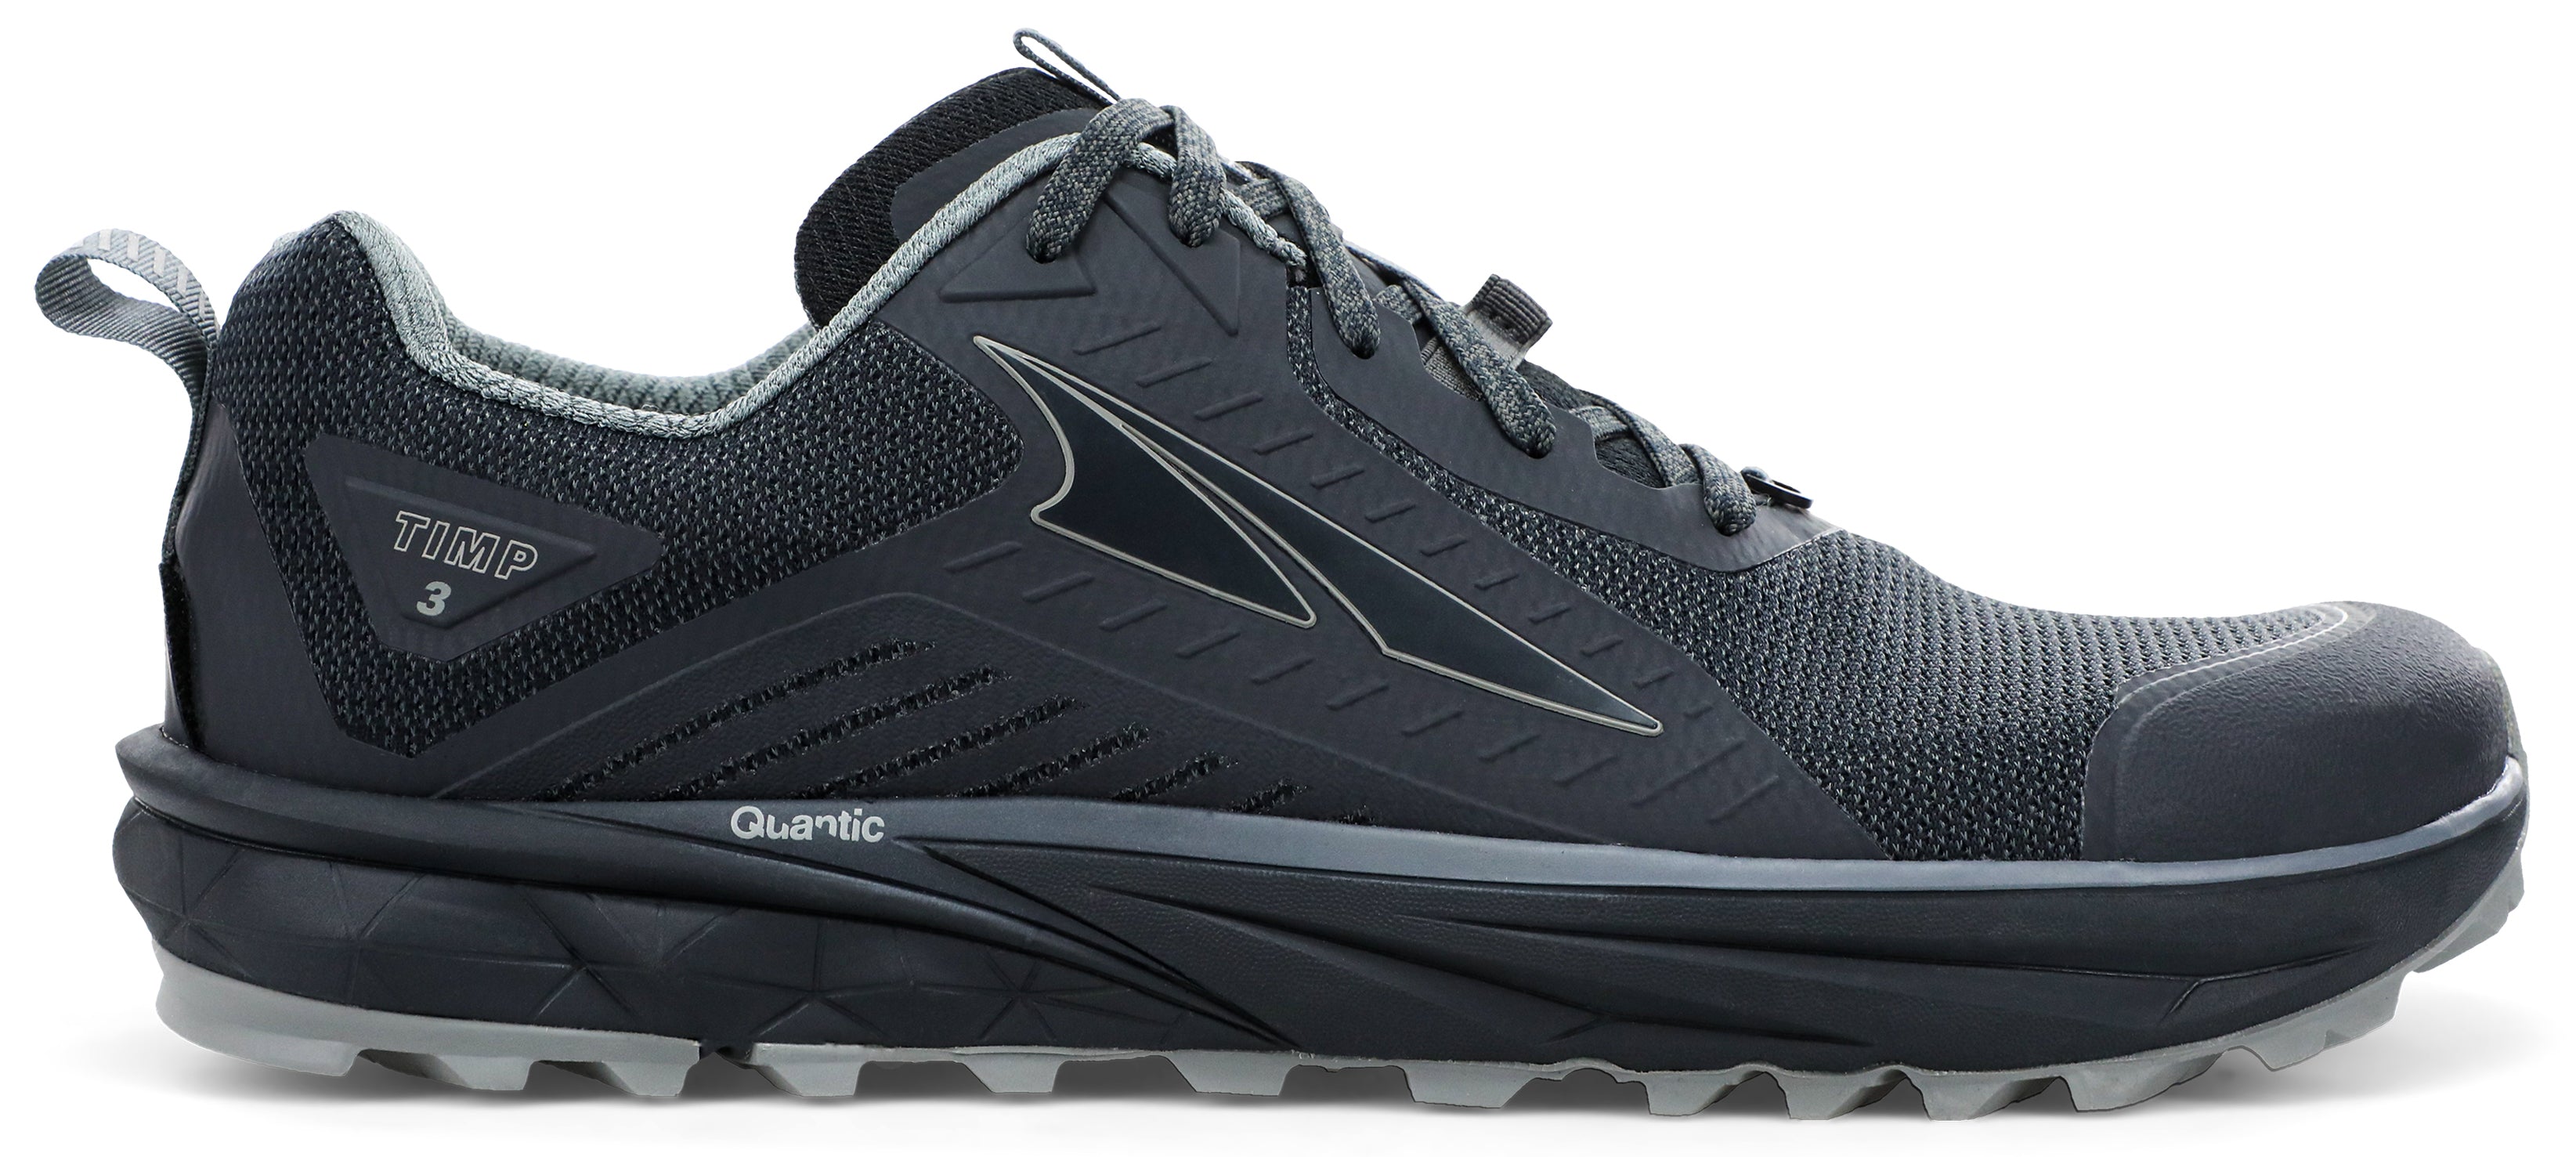 Men's Altra Timp 3 Trail Running Shoe in Black from the side